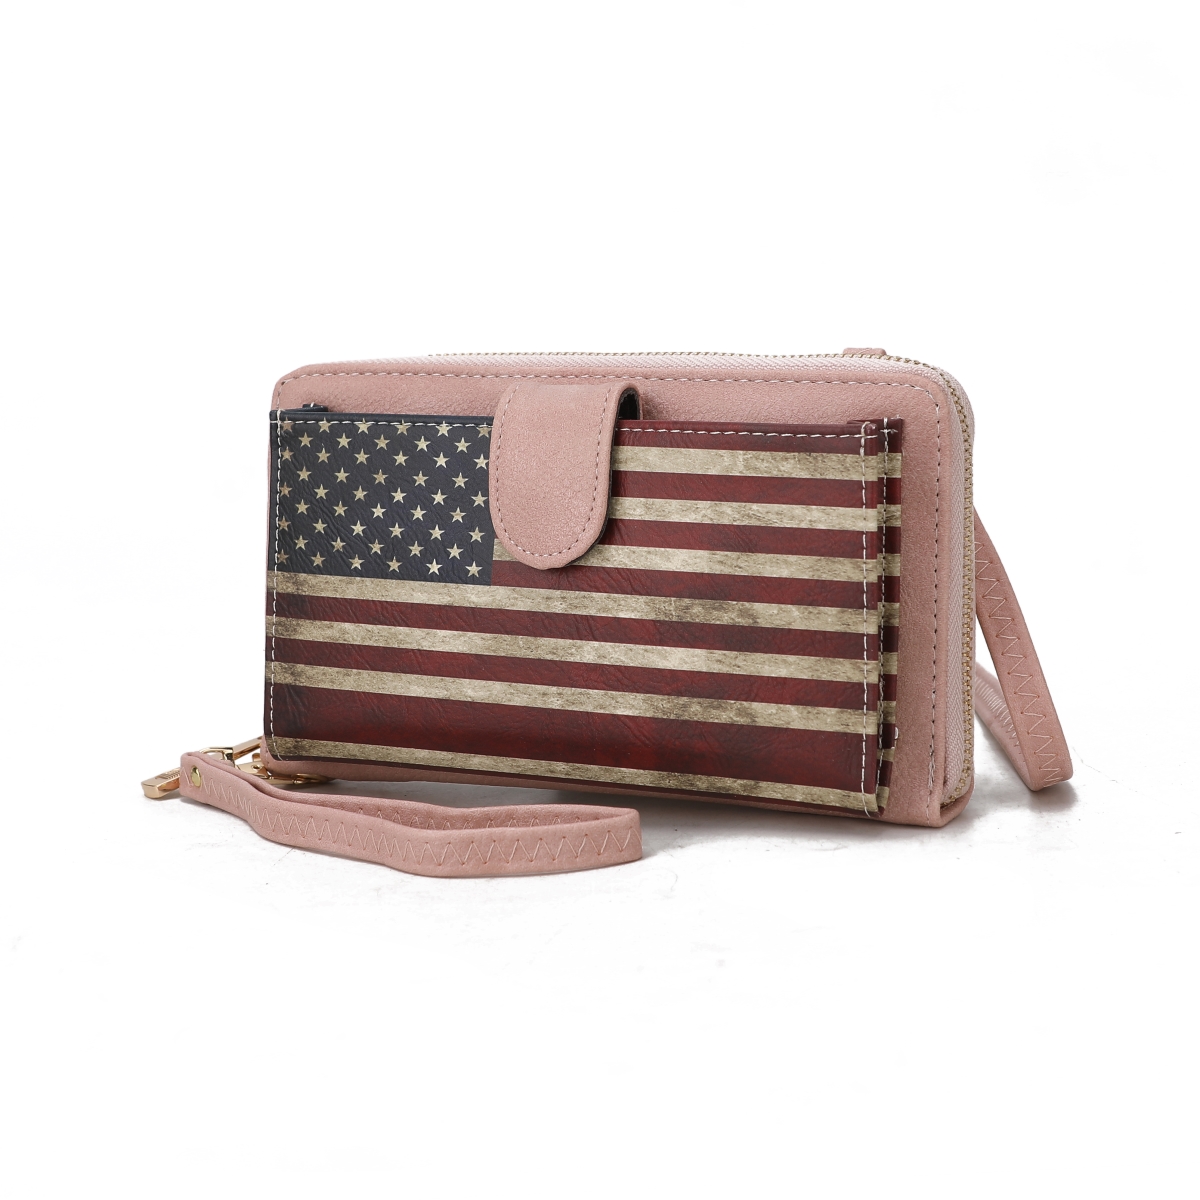 Picture of MKF Collection by Mia K. MKF-FG7406RPK Kiara Smartphone and Wallet Convertible FLAG Crossbody Bag